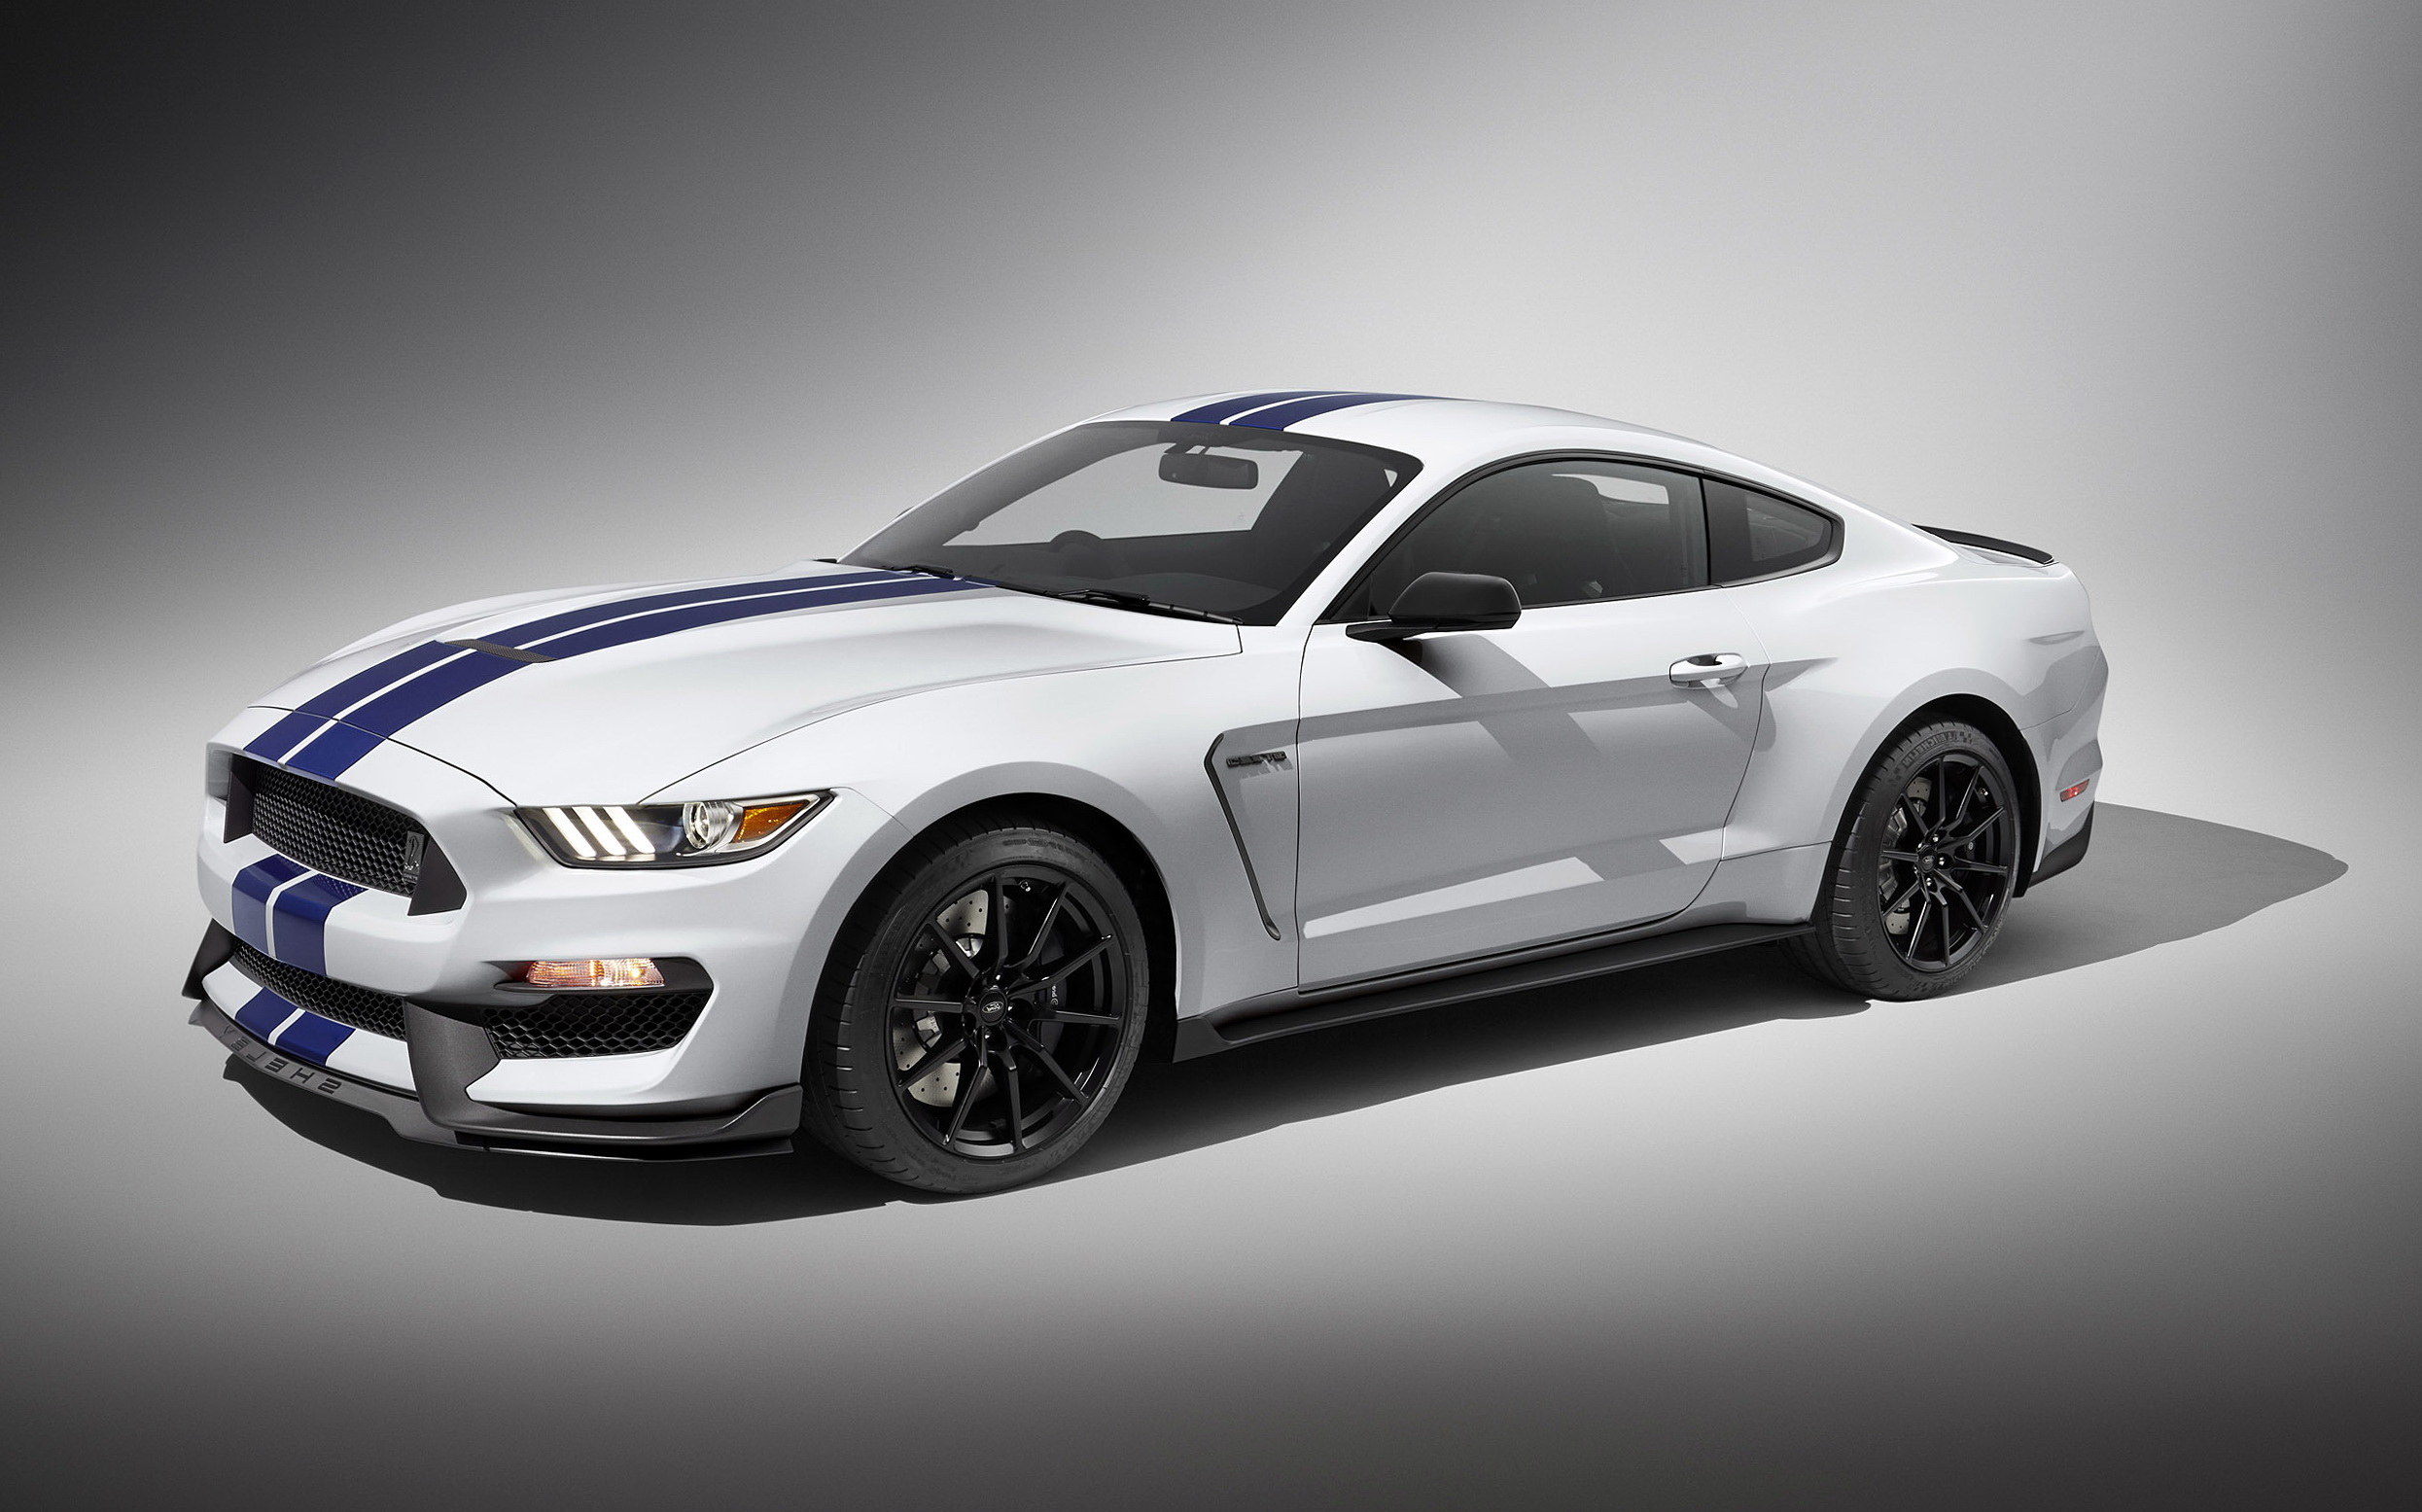 Ford Mustang Shelby Gt350 Wallpaper Automotive Designs